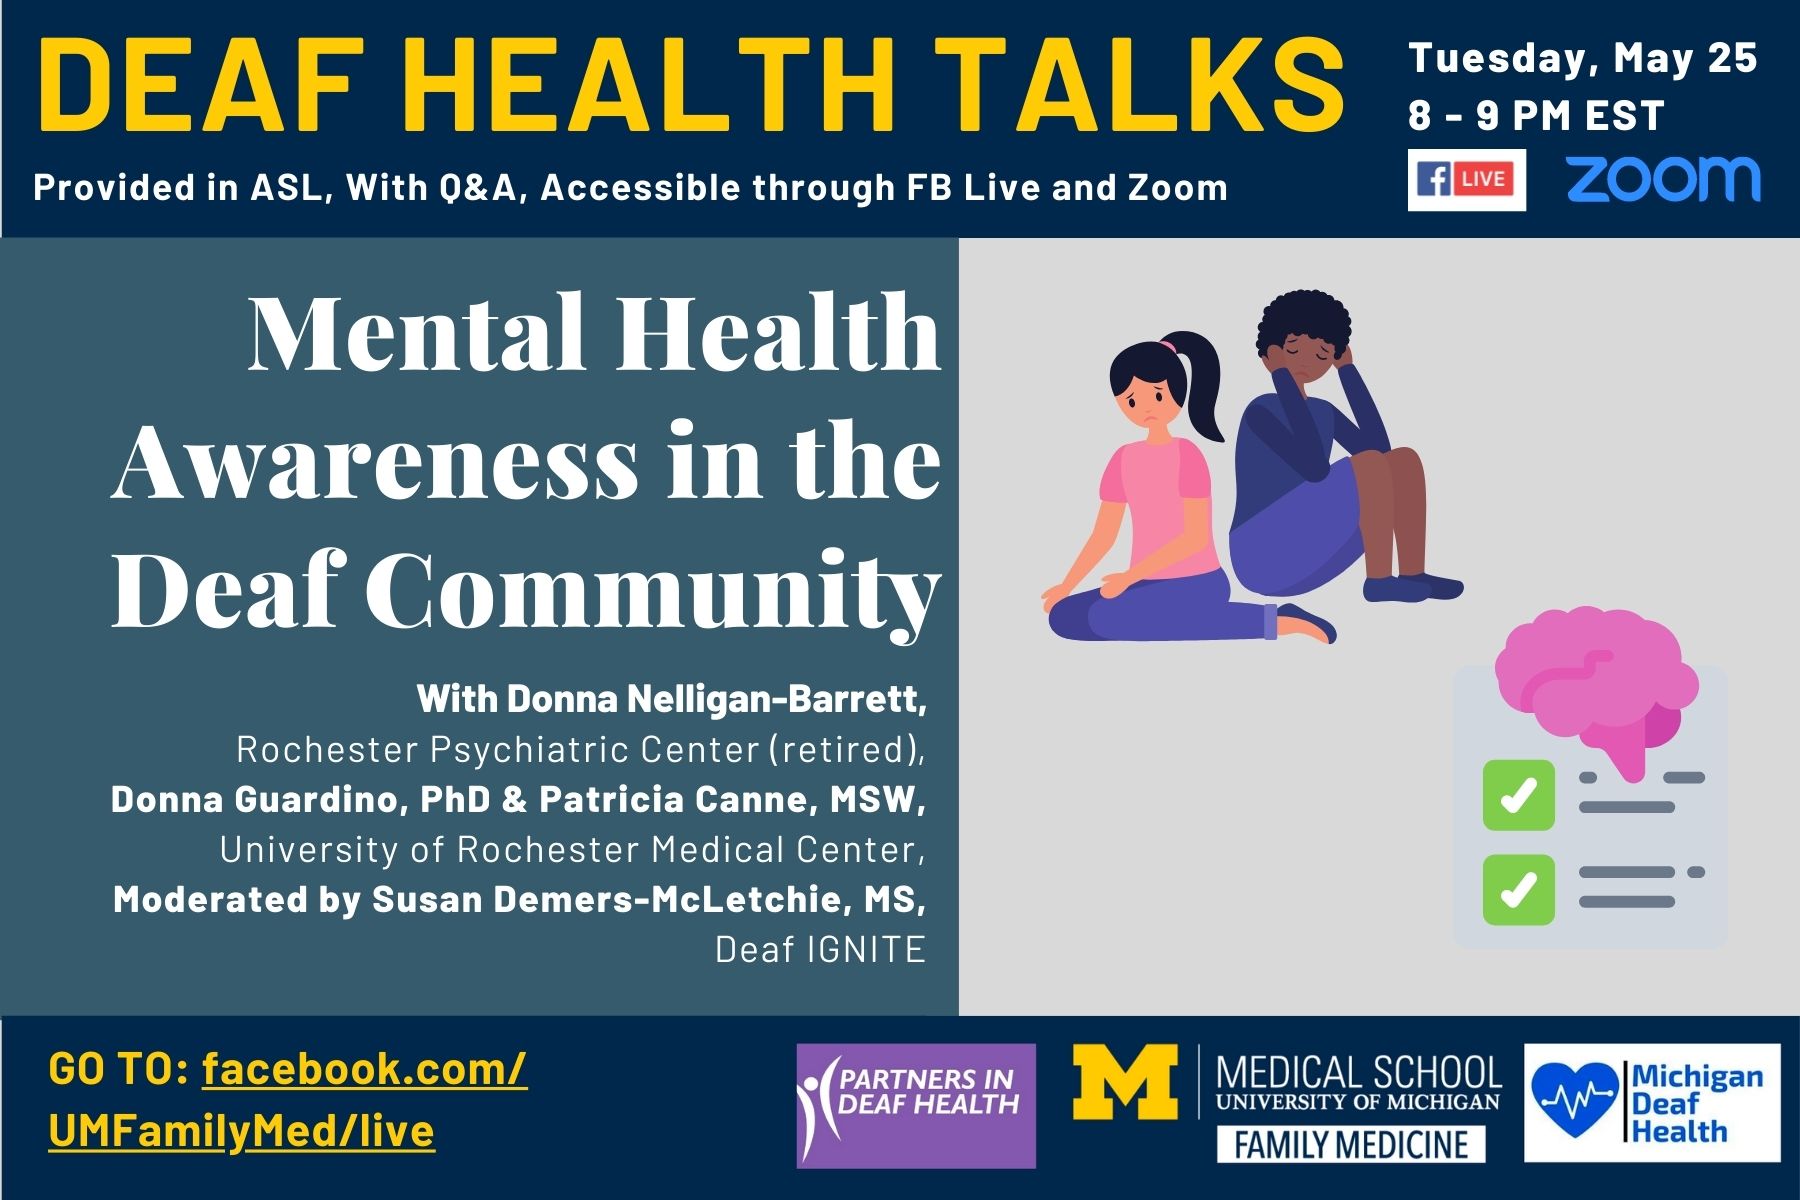 Deaf Health Talks, provided in ASL, with Q&A. Happening Tuesday, May 25, 8 to 9PM EST, on Facebook Live and Zoom. Mental health awareness in the deaf community. Donna Nelligan-Barrett, Donna Guardino, Patricia Canne, Susan Demers-McLetchie